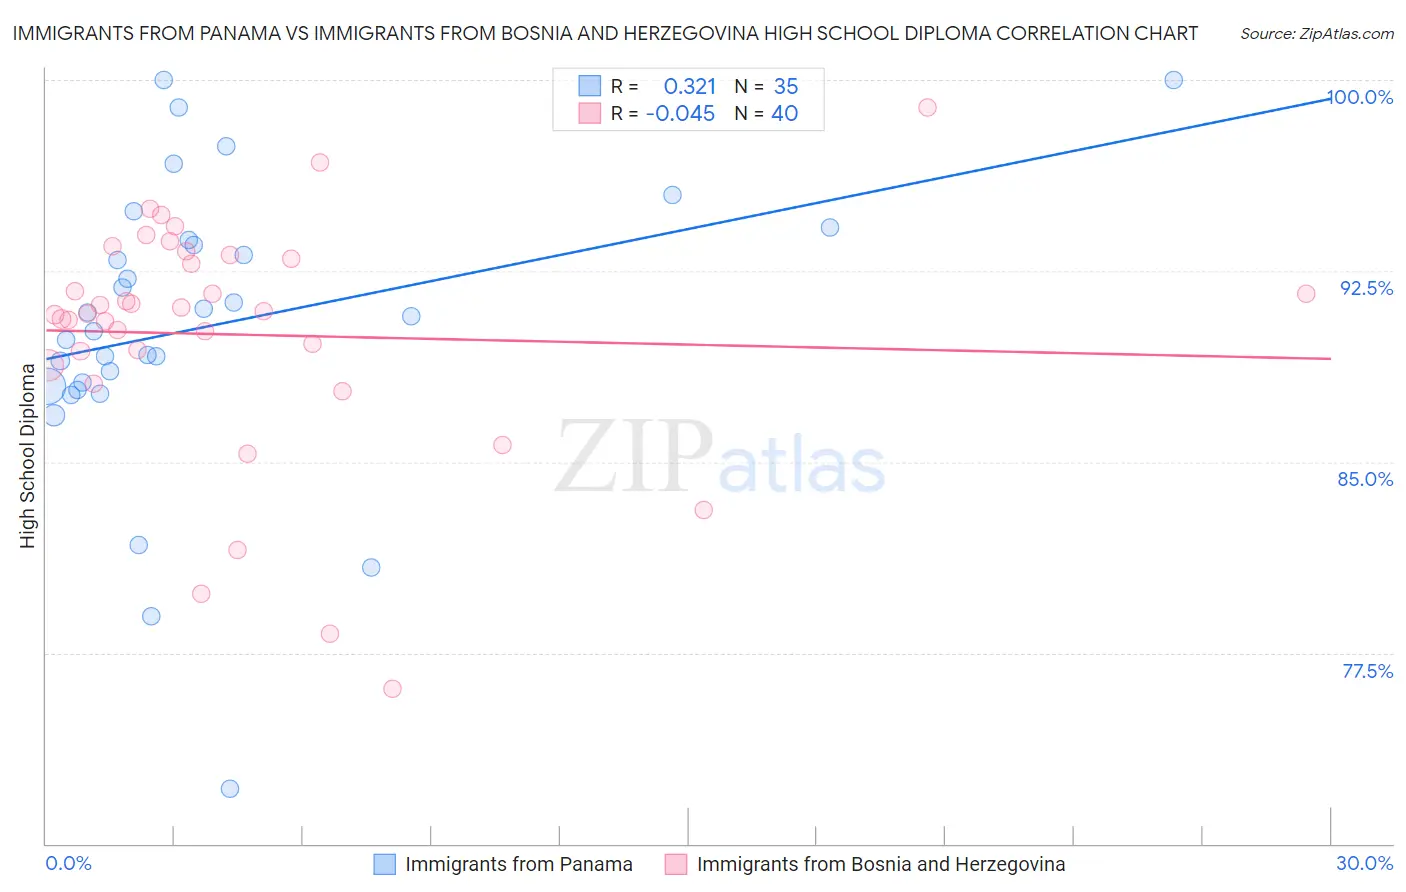 Immigrants from Panama vs Immigrants from Bosnia and Herzegovina High School Diploma